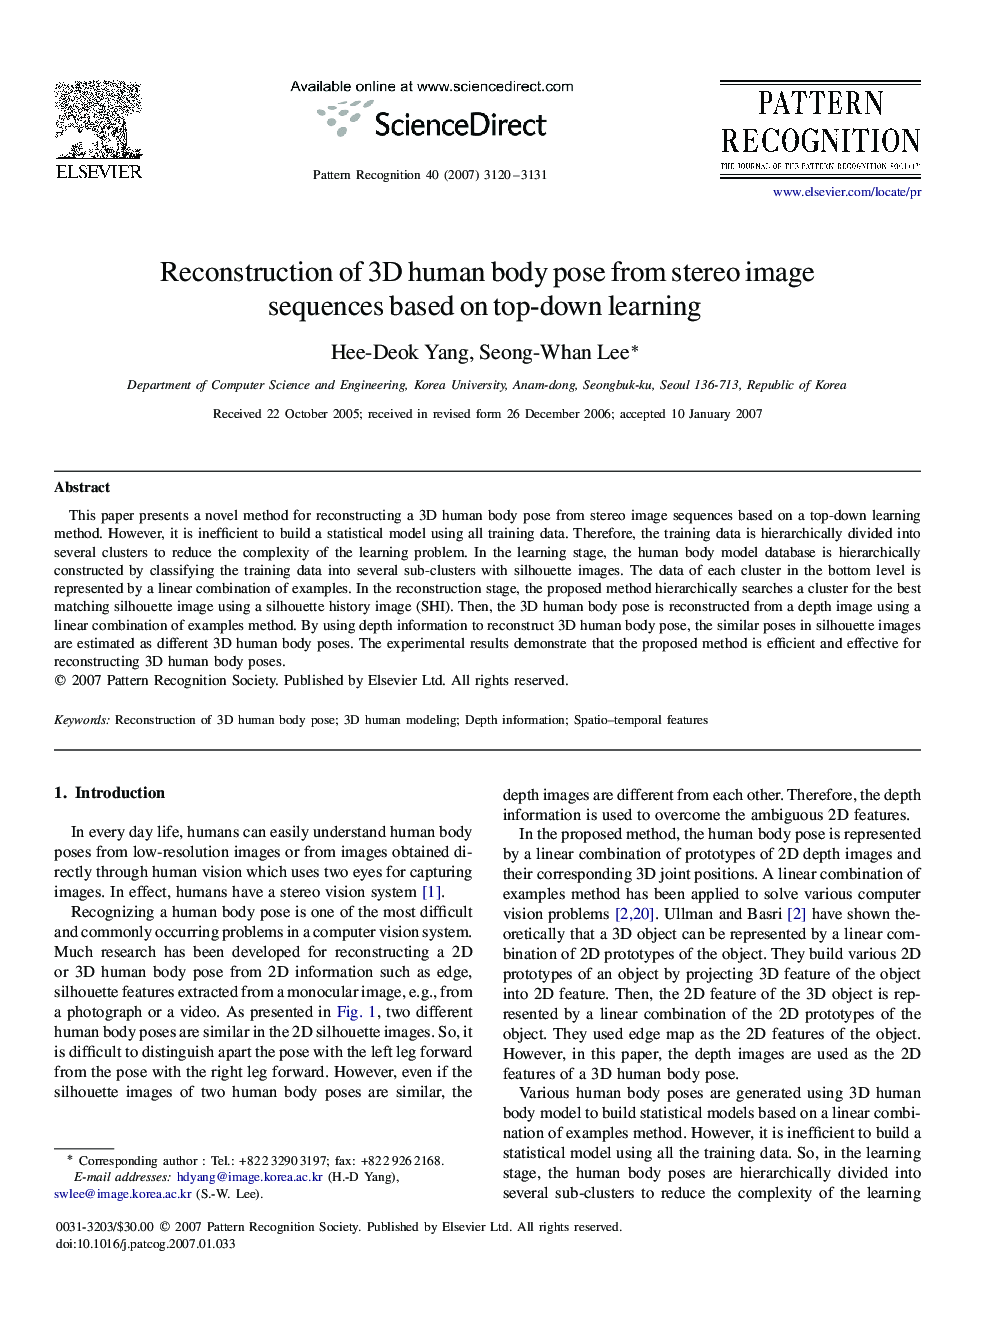 Reconstruction of 3D human body pose from stereo image sequences based on top-down learning